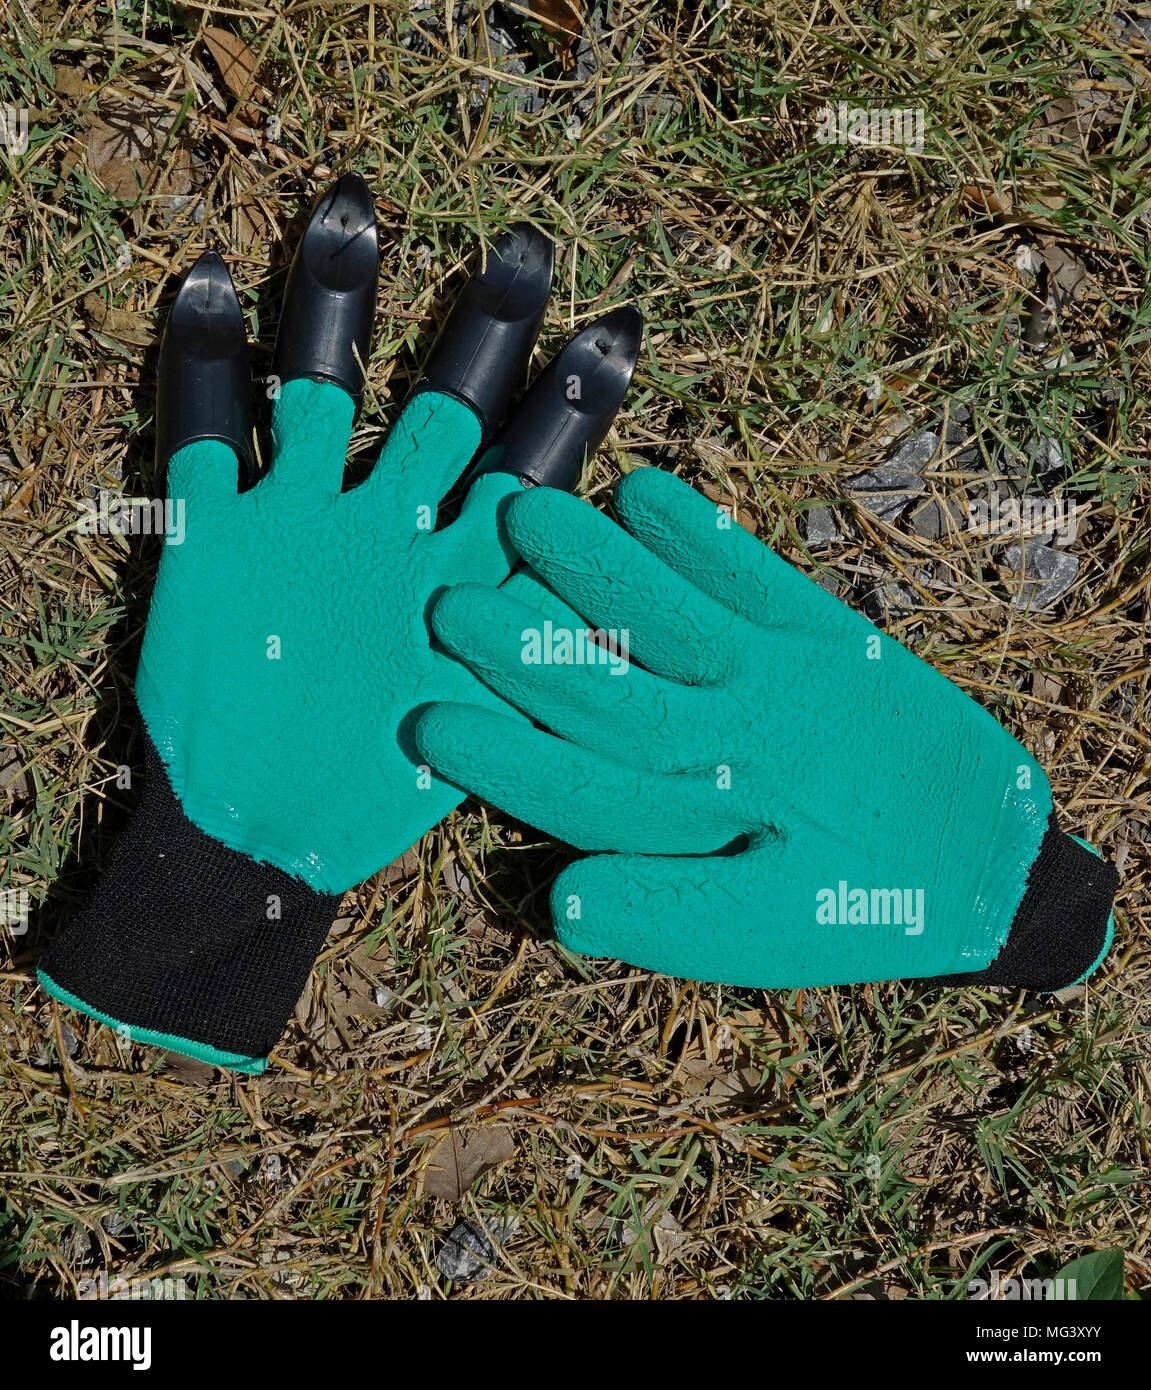 Pair of light green synthetic fabric garden gloves with black elastic wristbands and one glove equipped with claw fingers Stock Photo